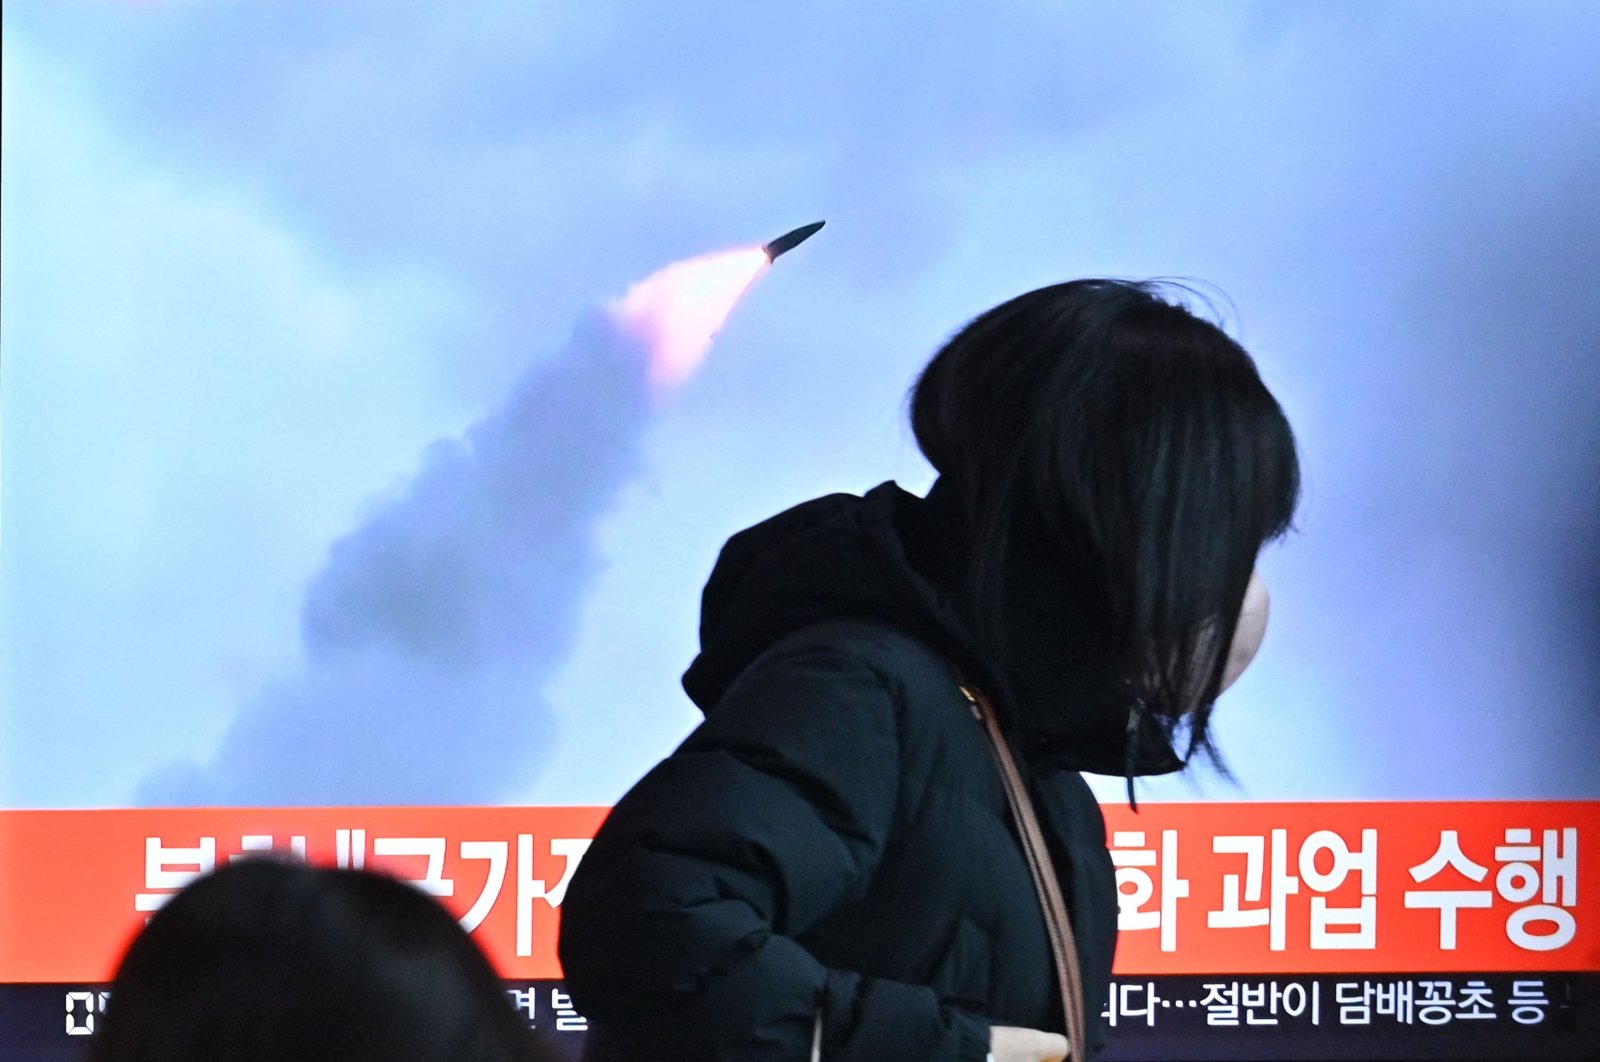 People walk past a television screen showing a news broadcast with file footage of a North Korean missile test, at a railway station in Seoul, South Korea, Jan. 11, 2022. (AFP Photo)